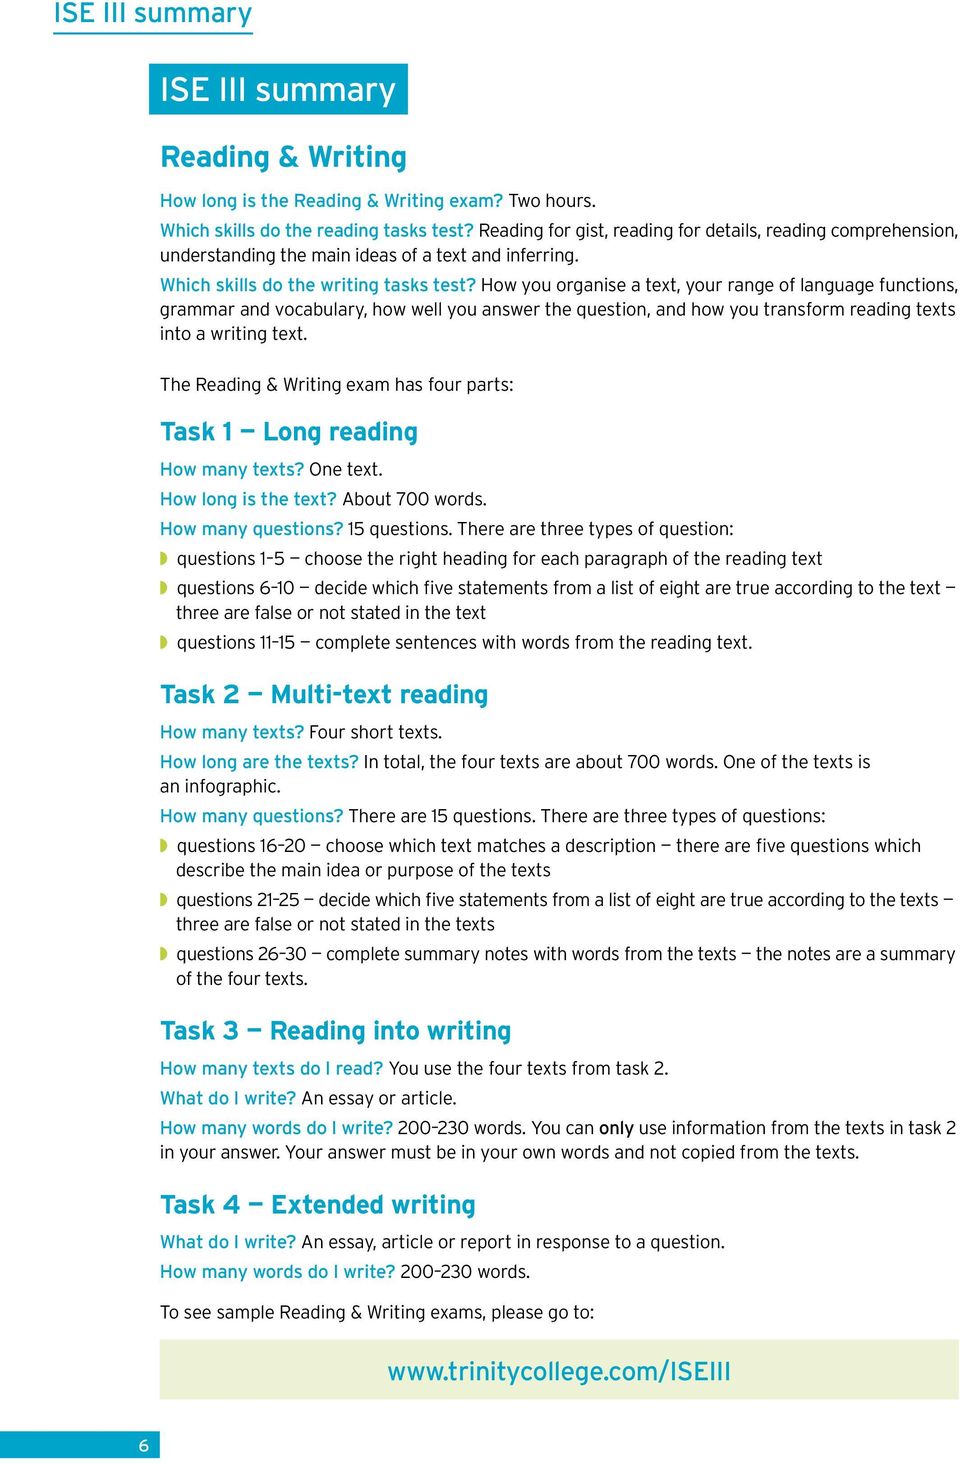 How you organise a text, your range of language functions, grammar and vocabulary, how well you answer the question, and how you transform reading texts into a writing text.